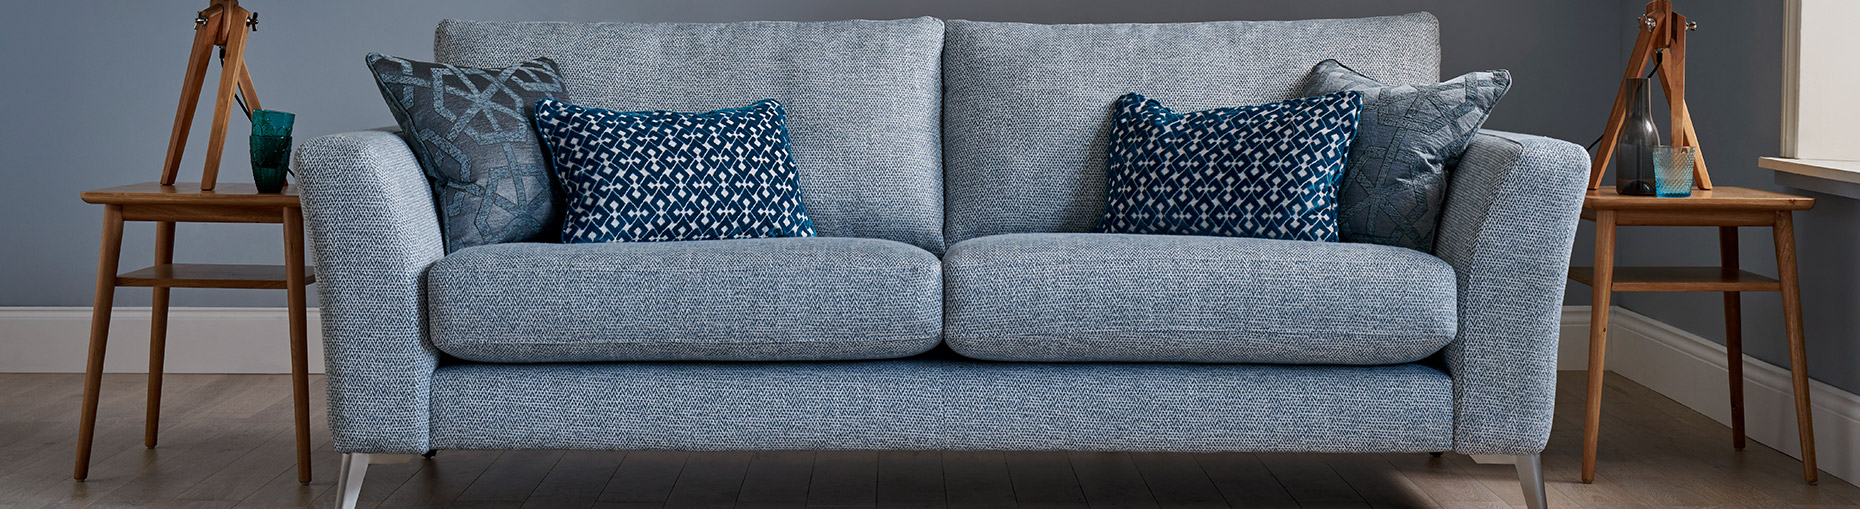 Chilton sofa collection at Forrest Furnishing